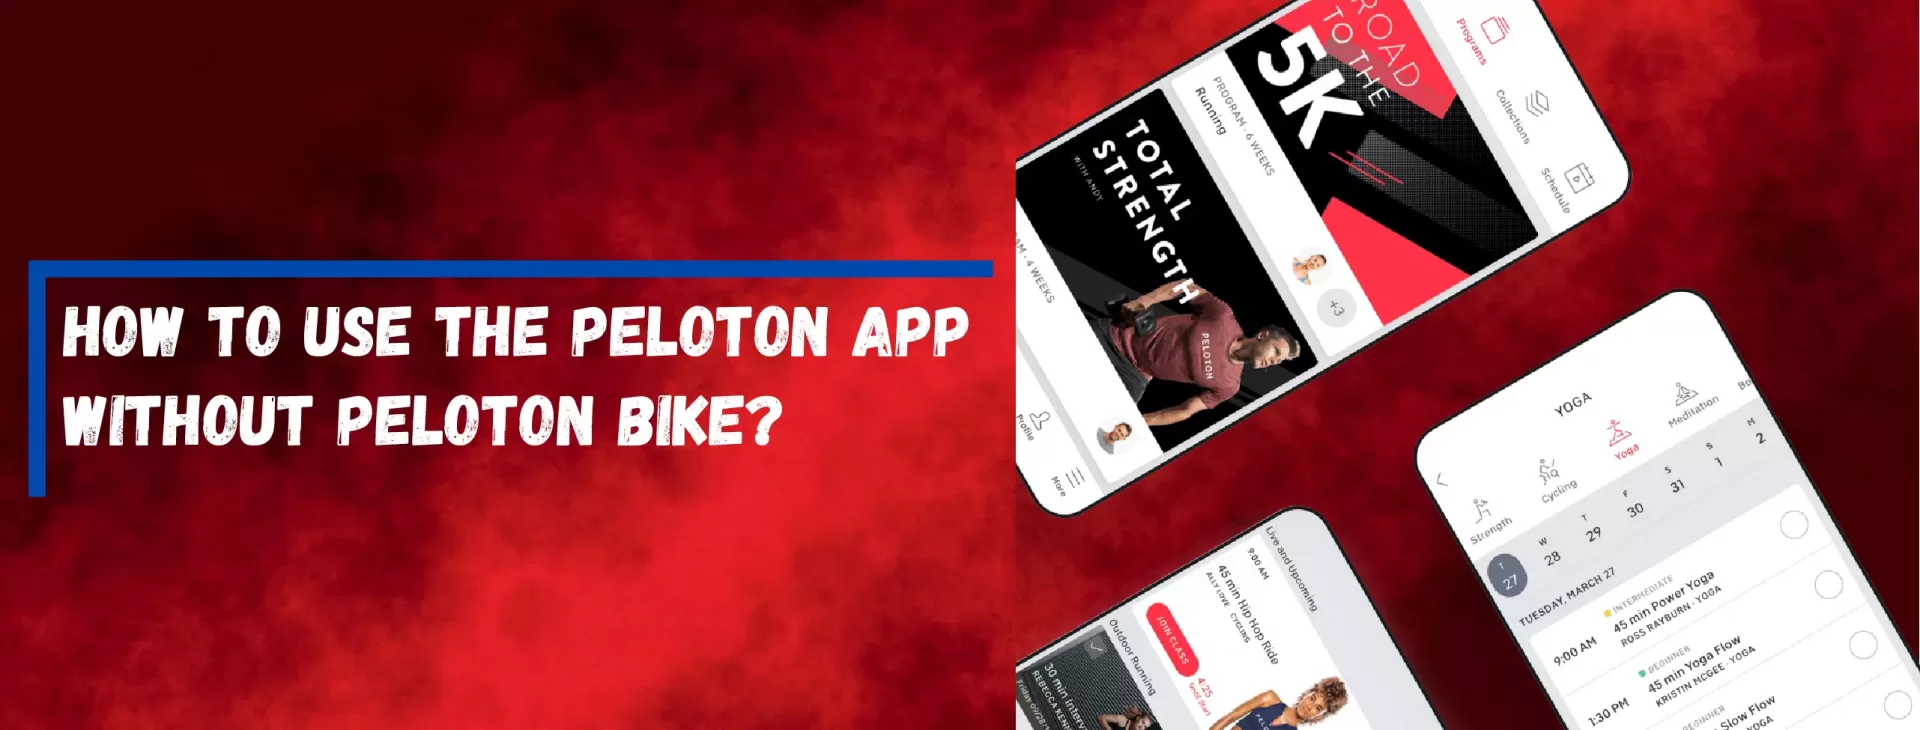 How To Use The Peloton App Without Peloton Bike